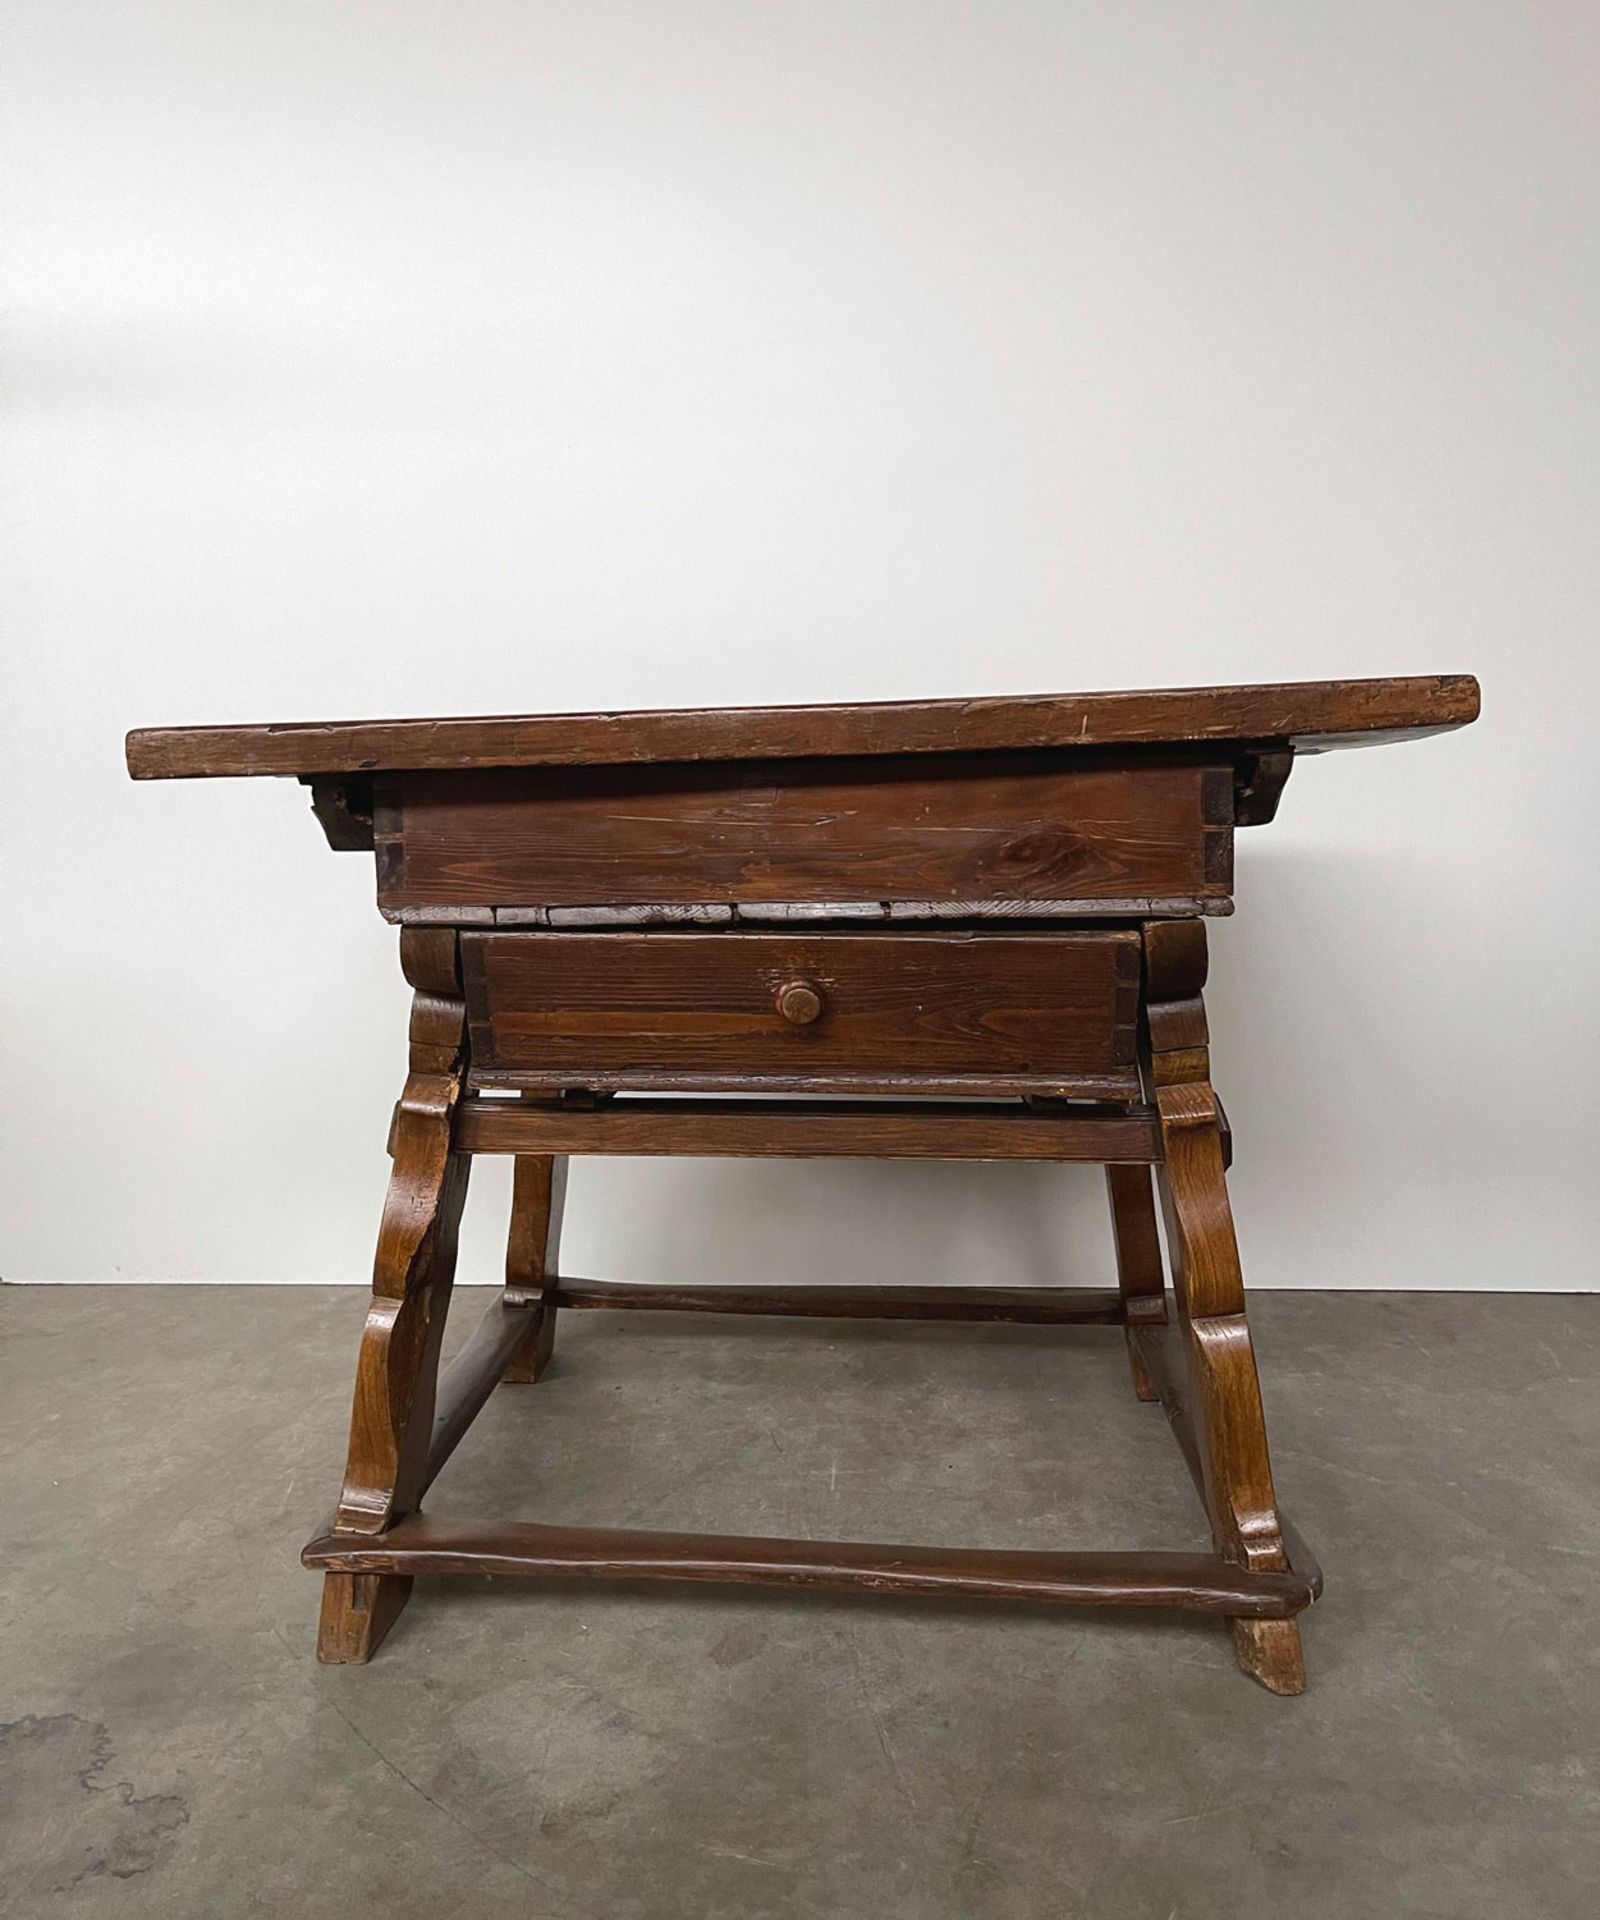 Antique Wooden Pay Table